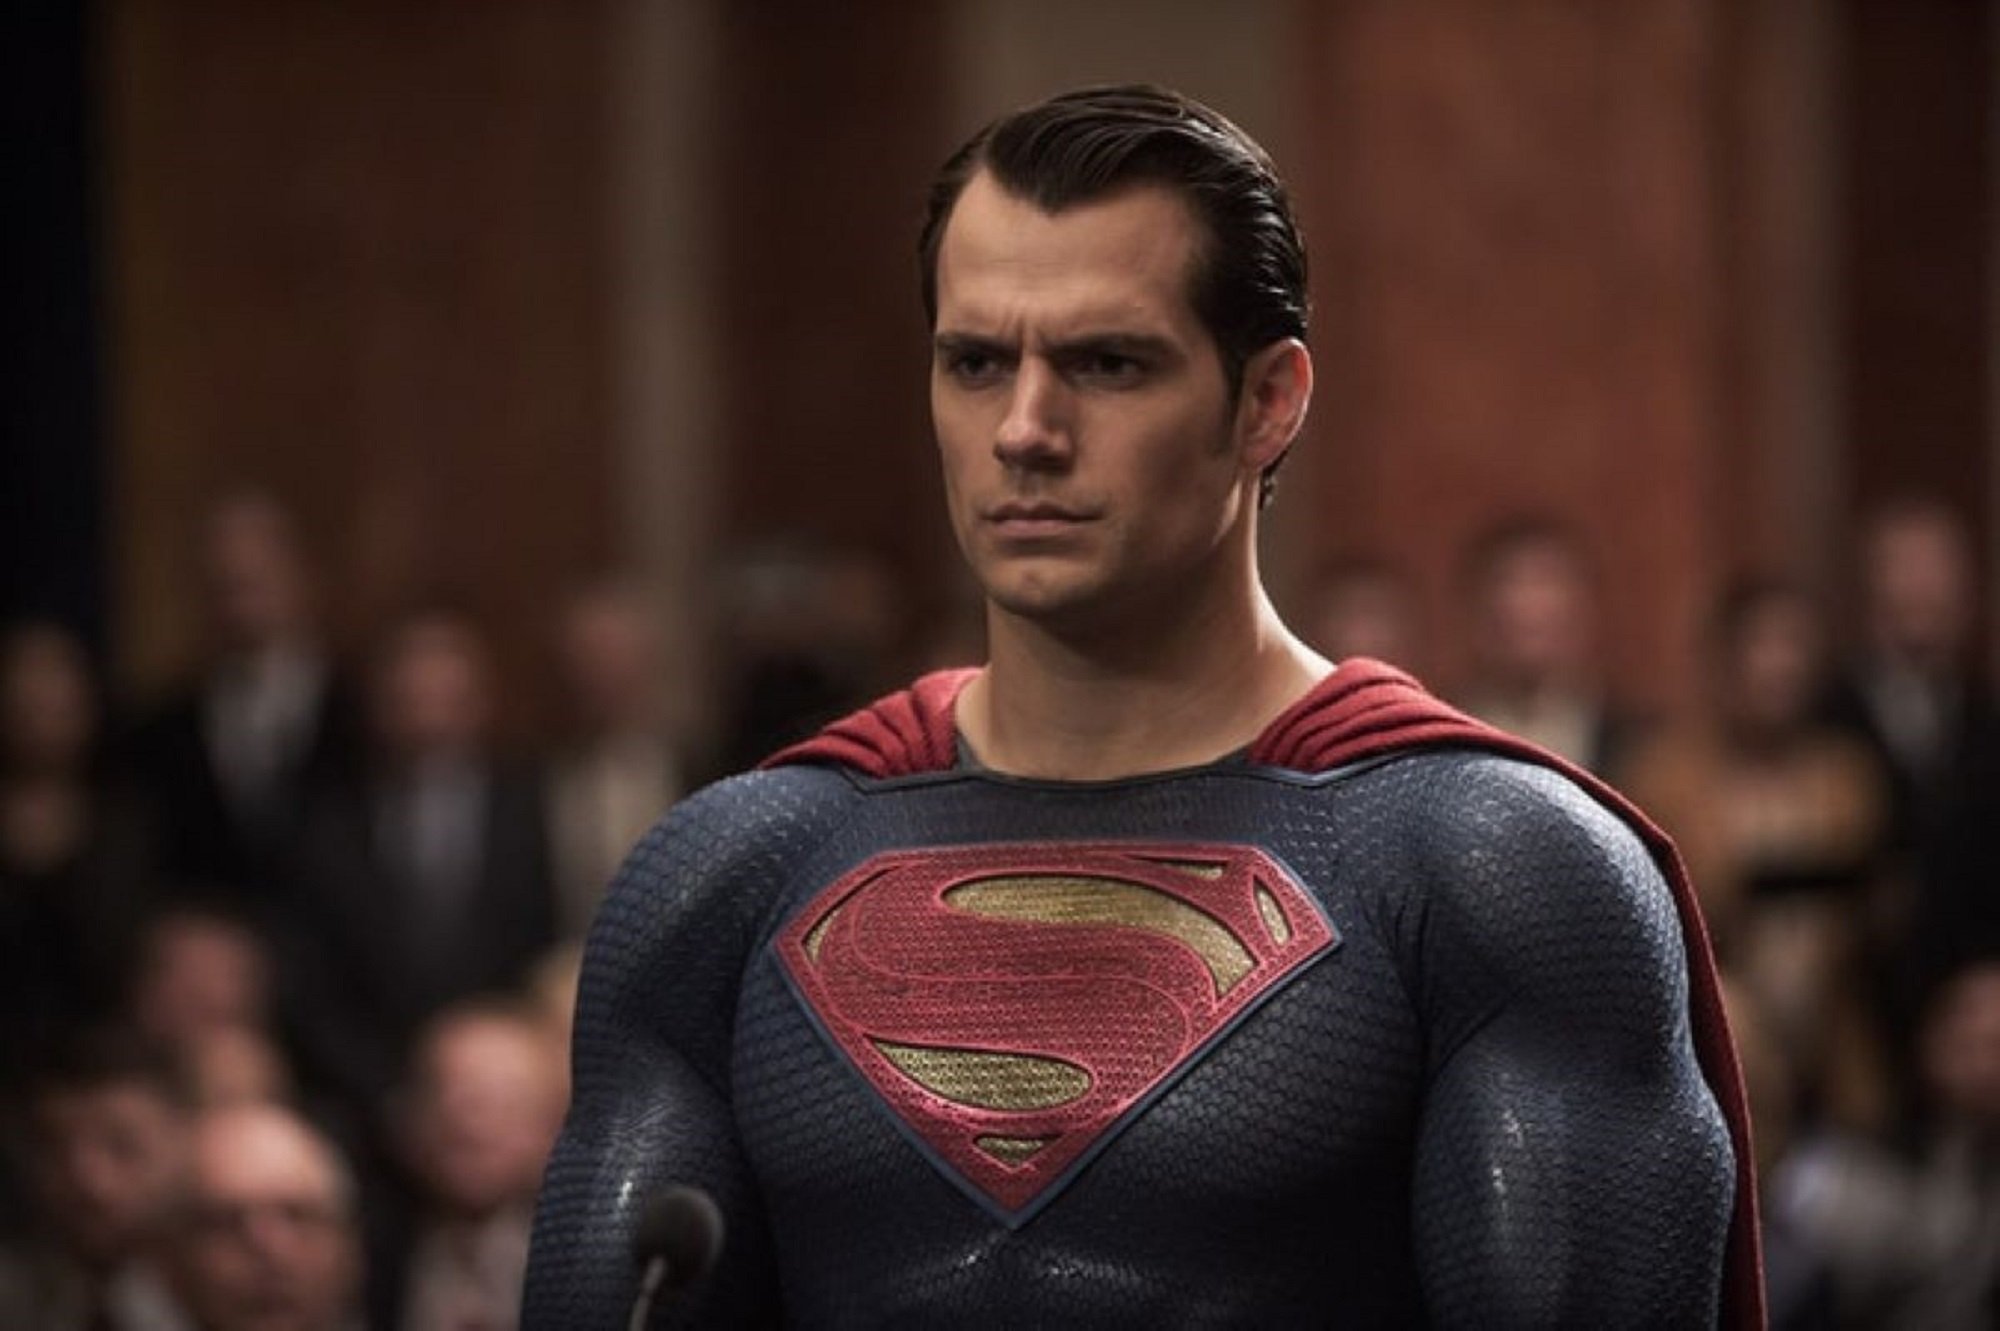 Henry Cavill dressed as Superman in the courtroom scene of 'Batman v Superman Dawn of Justice'